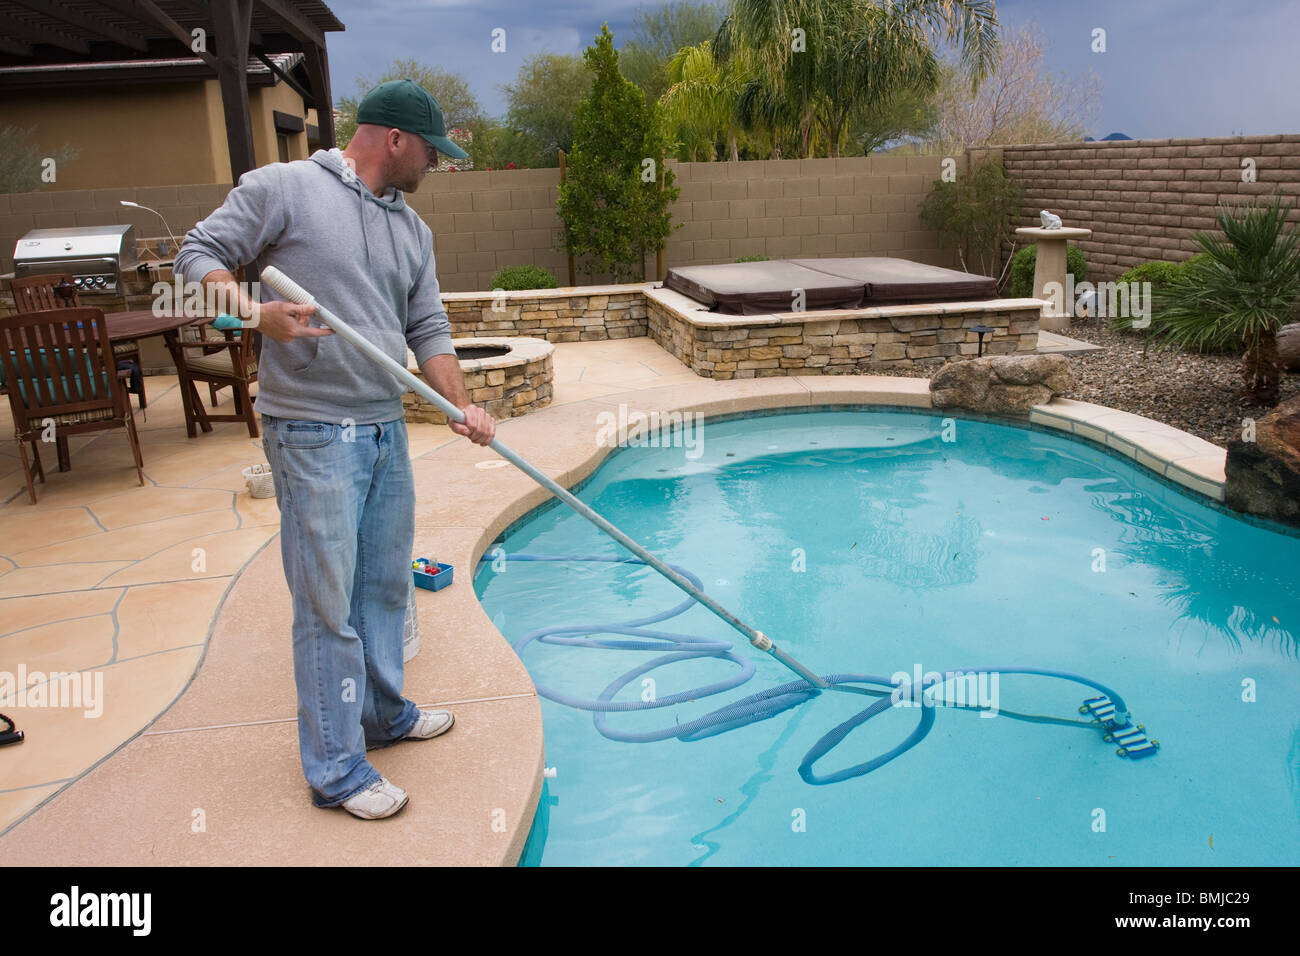 Man cleaning and vacuuming swimming pool Stock Photo - Alamy